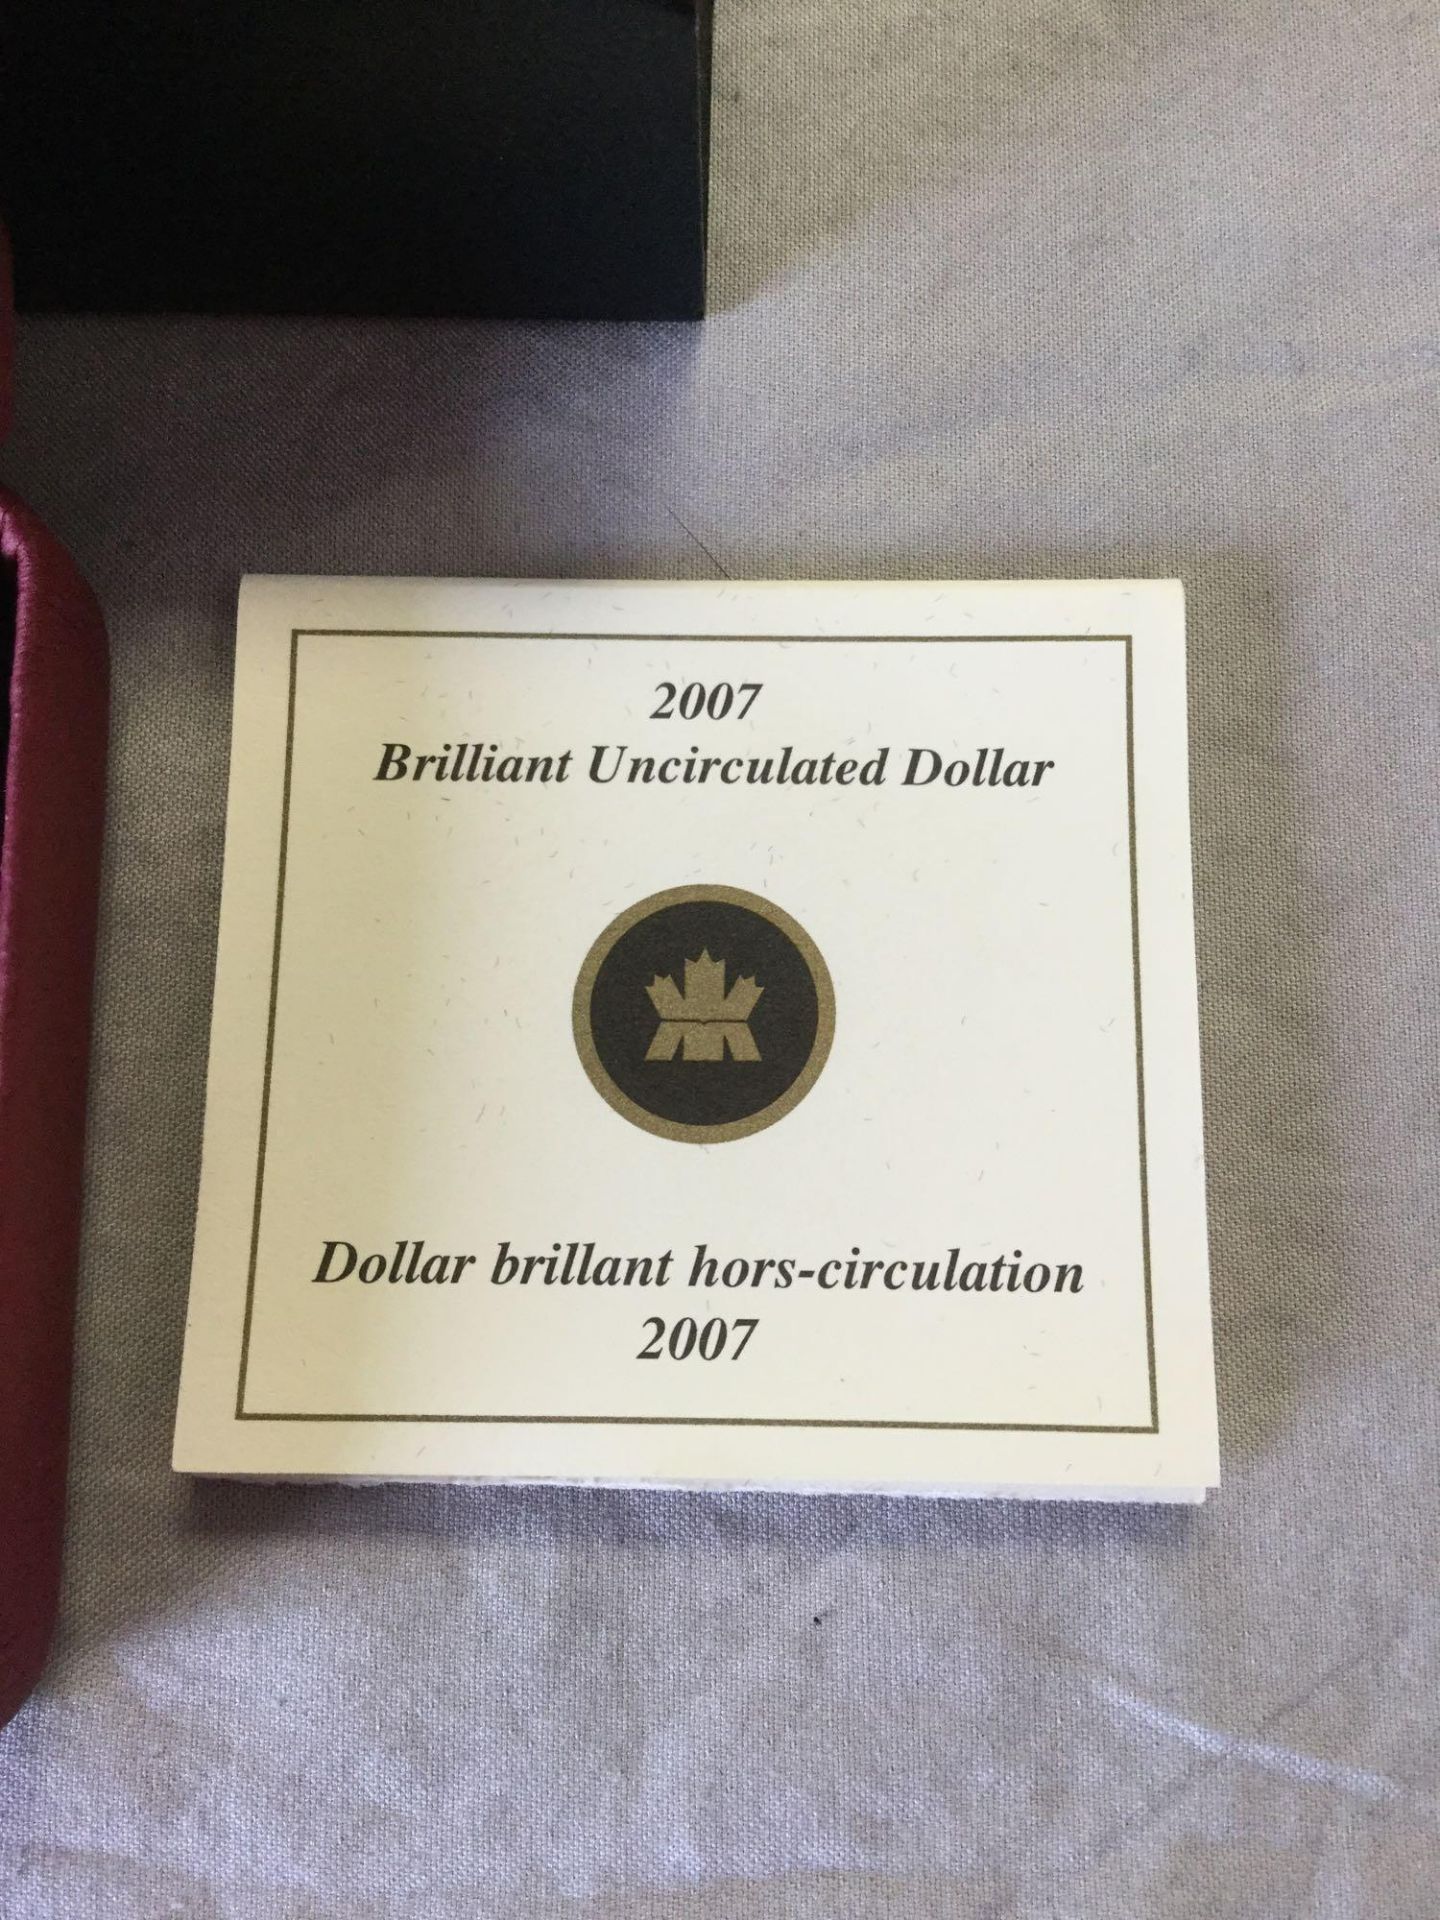 2007 Royal Canadian Mint - Brilliant Uncirculated Dollar - Image 3 of 3